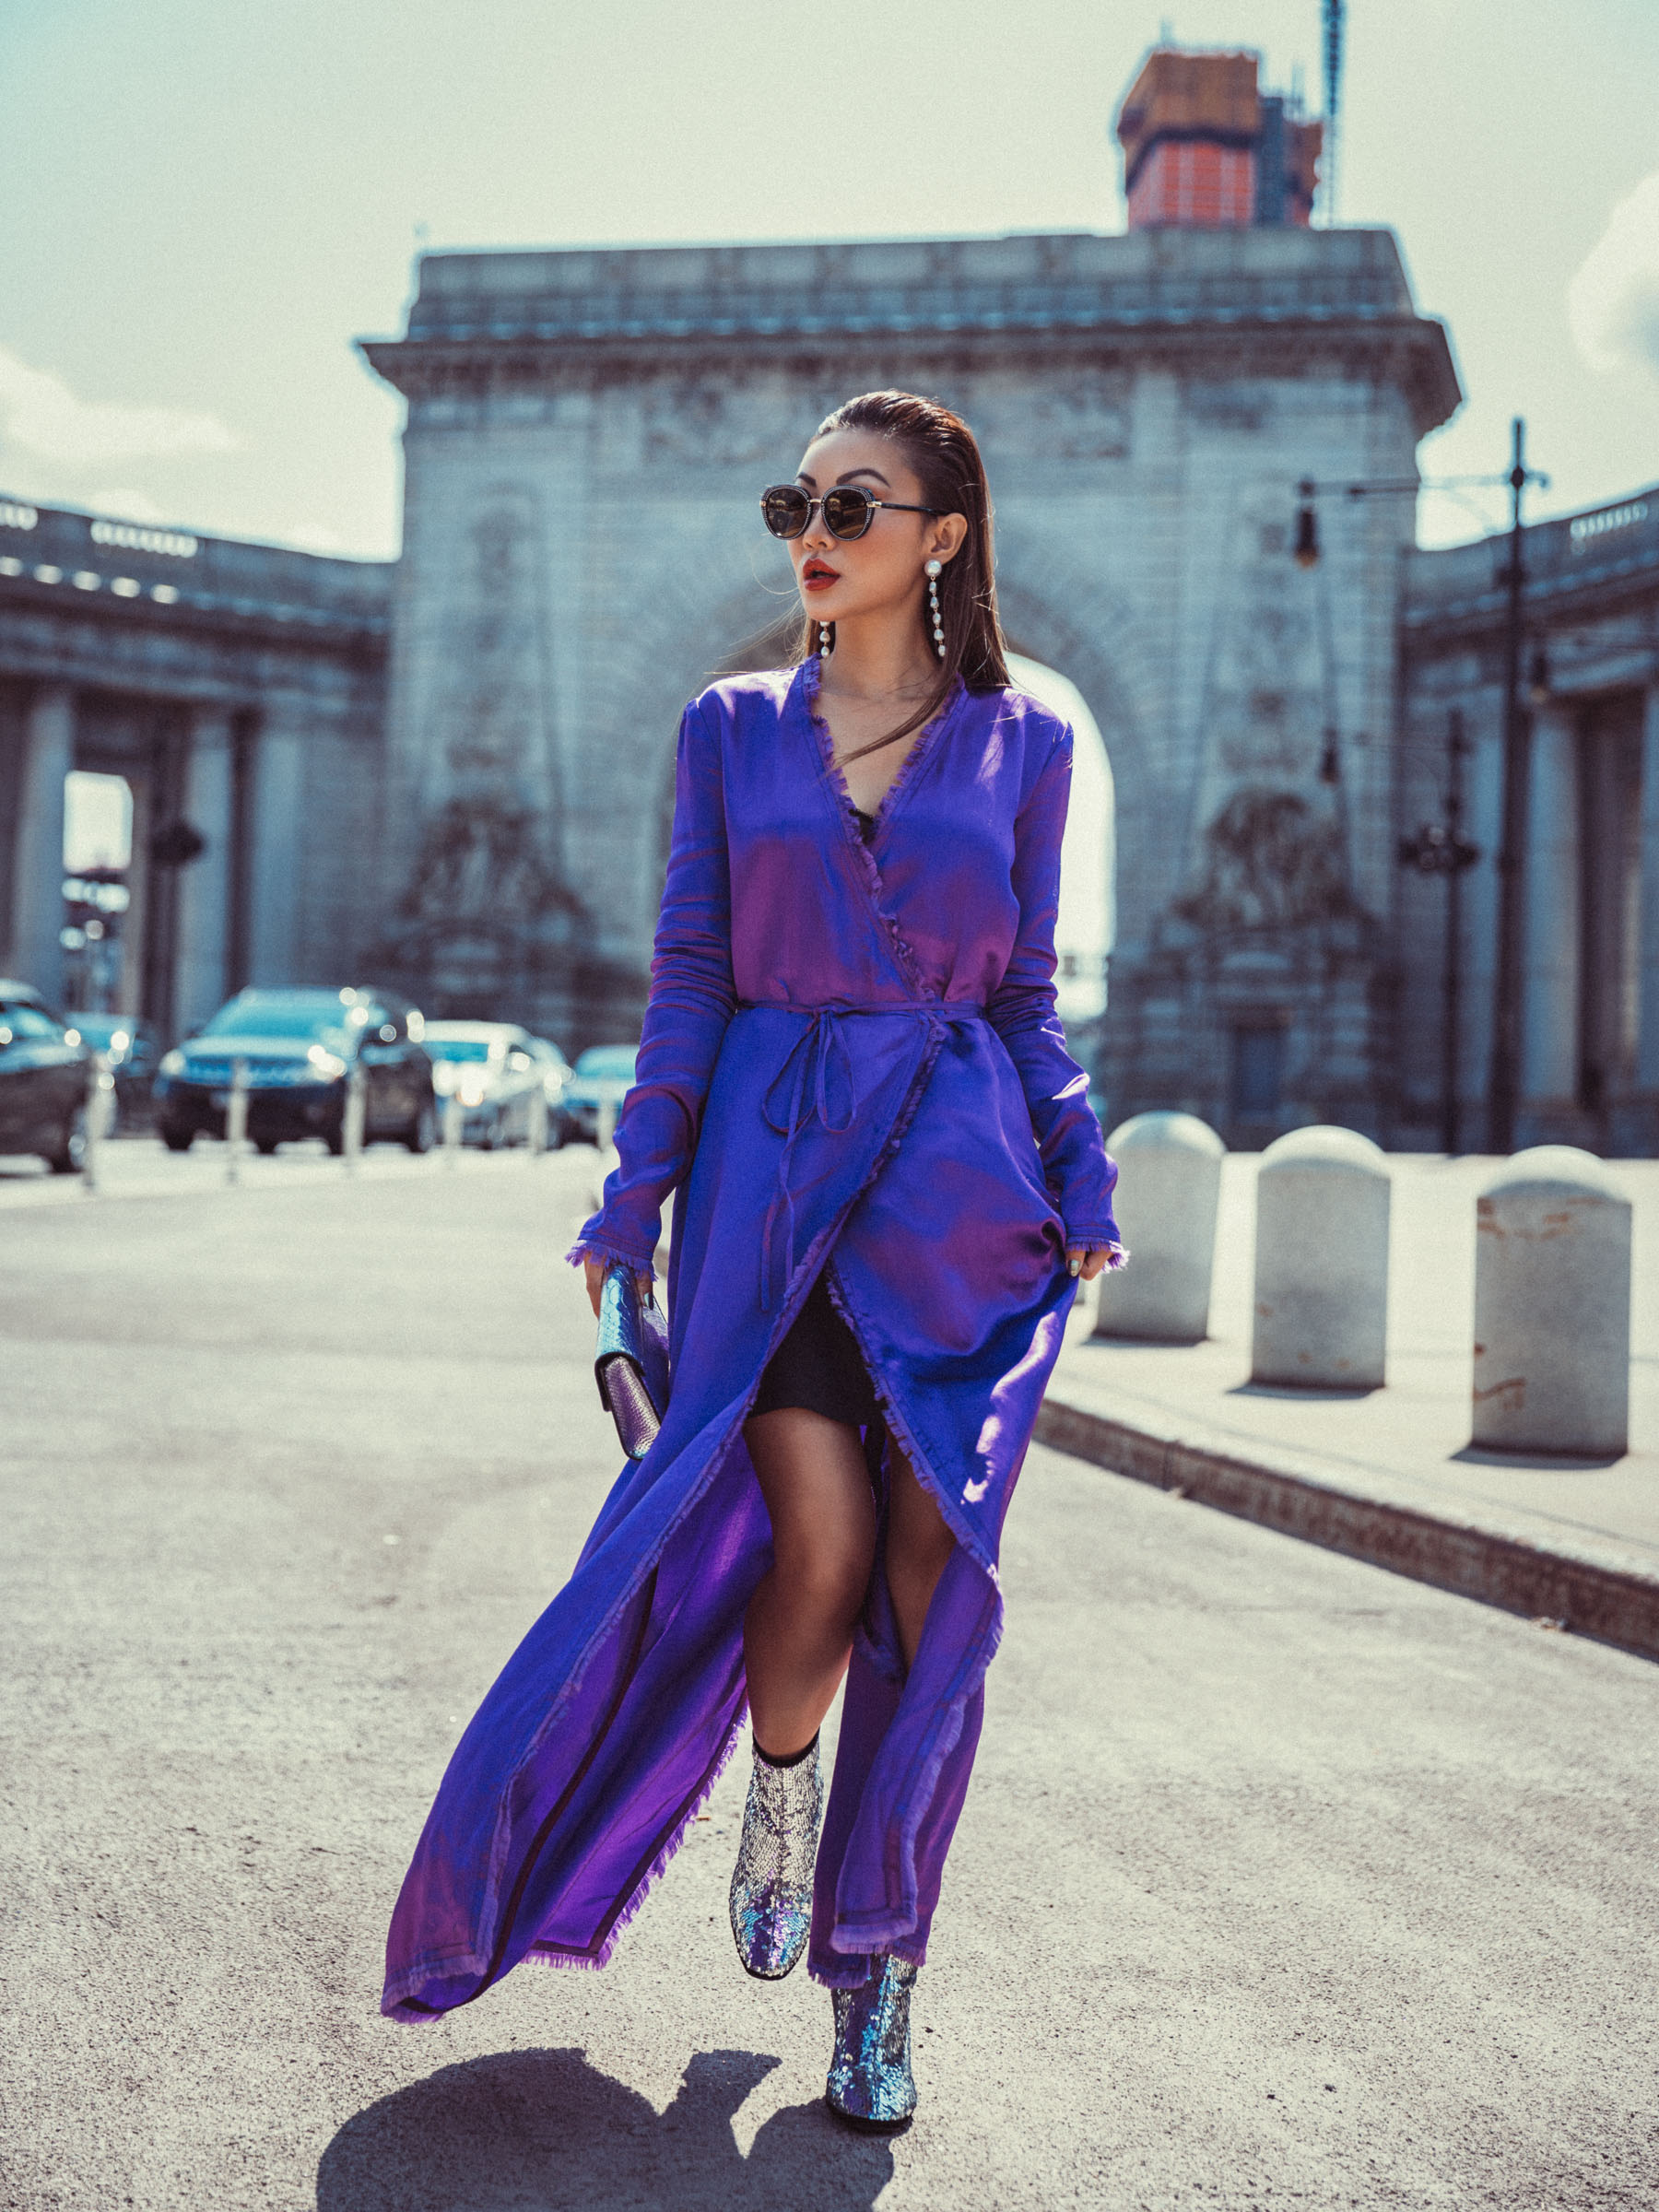 Womens Purple Clothing: 4 Stylish Purple Outfits Fashion Trends this Year